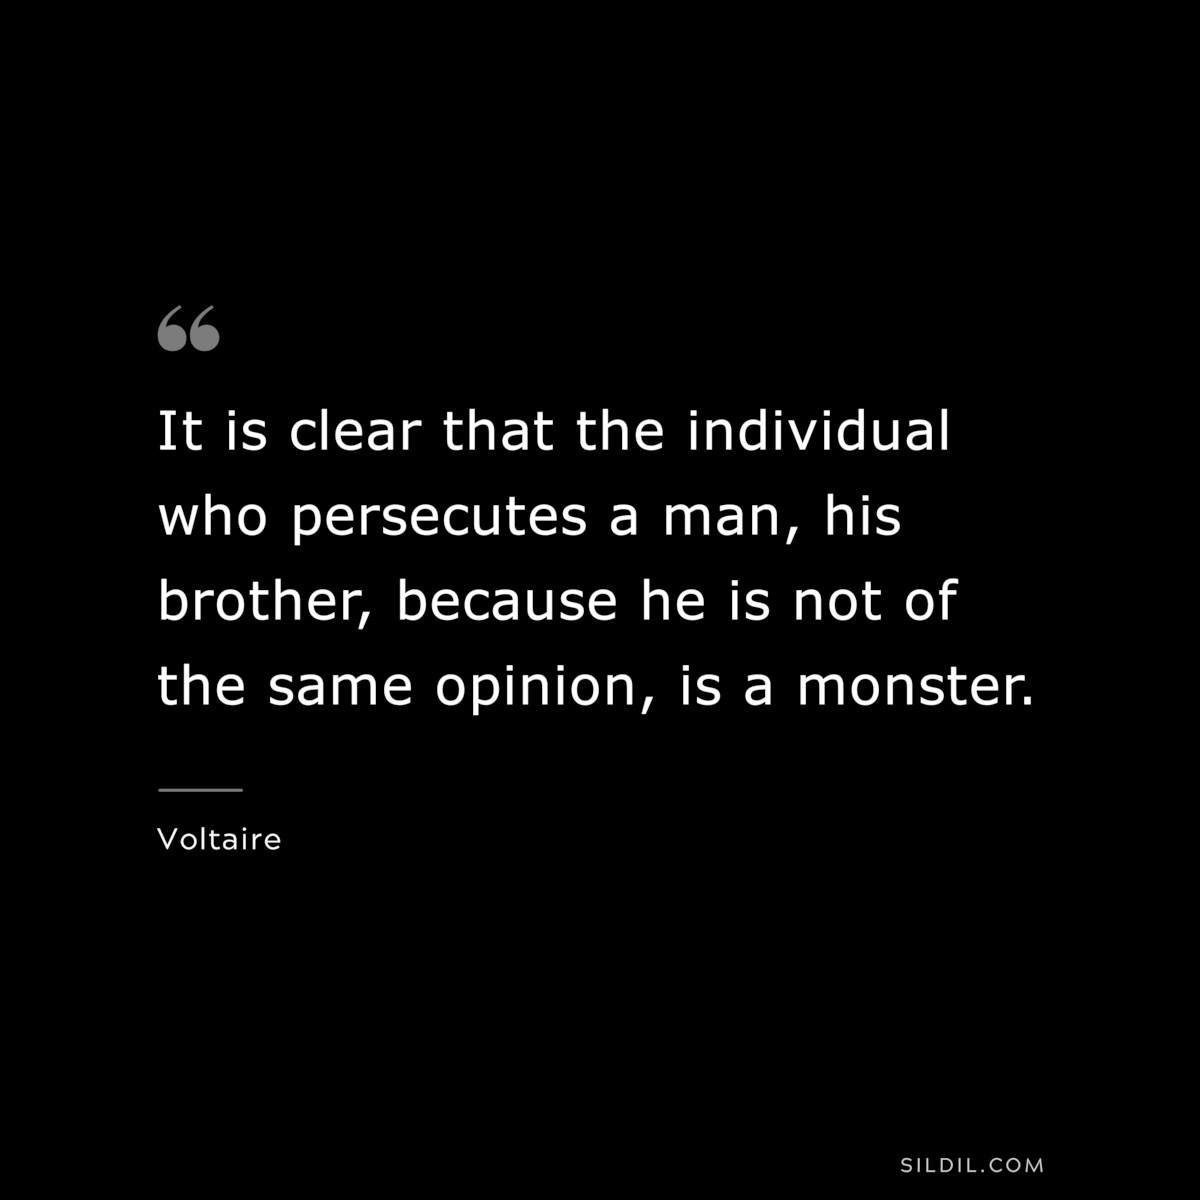 It is clear that the individual who persecutes a man, his brother, because he is not of the same opinion, is a monster. ― Voltaire